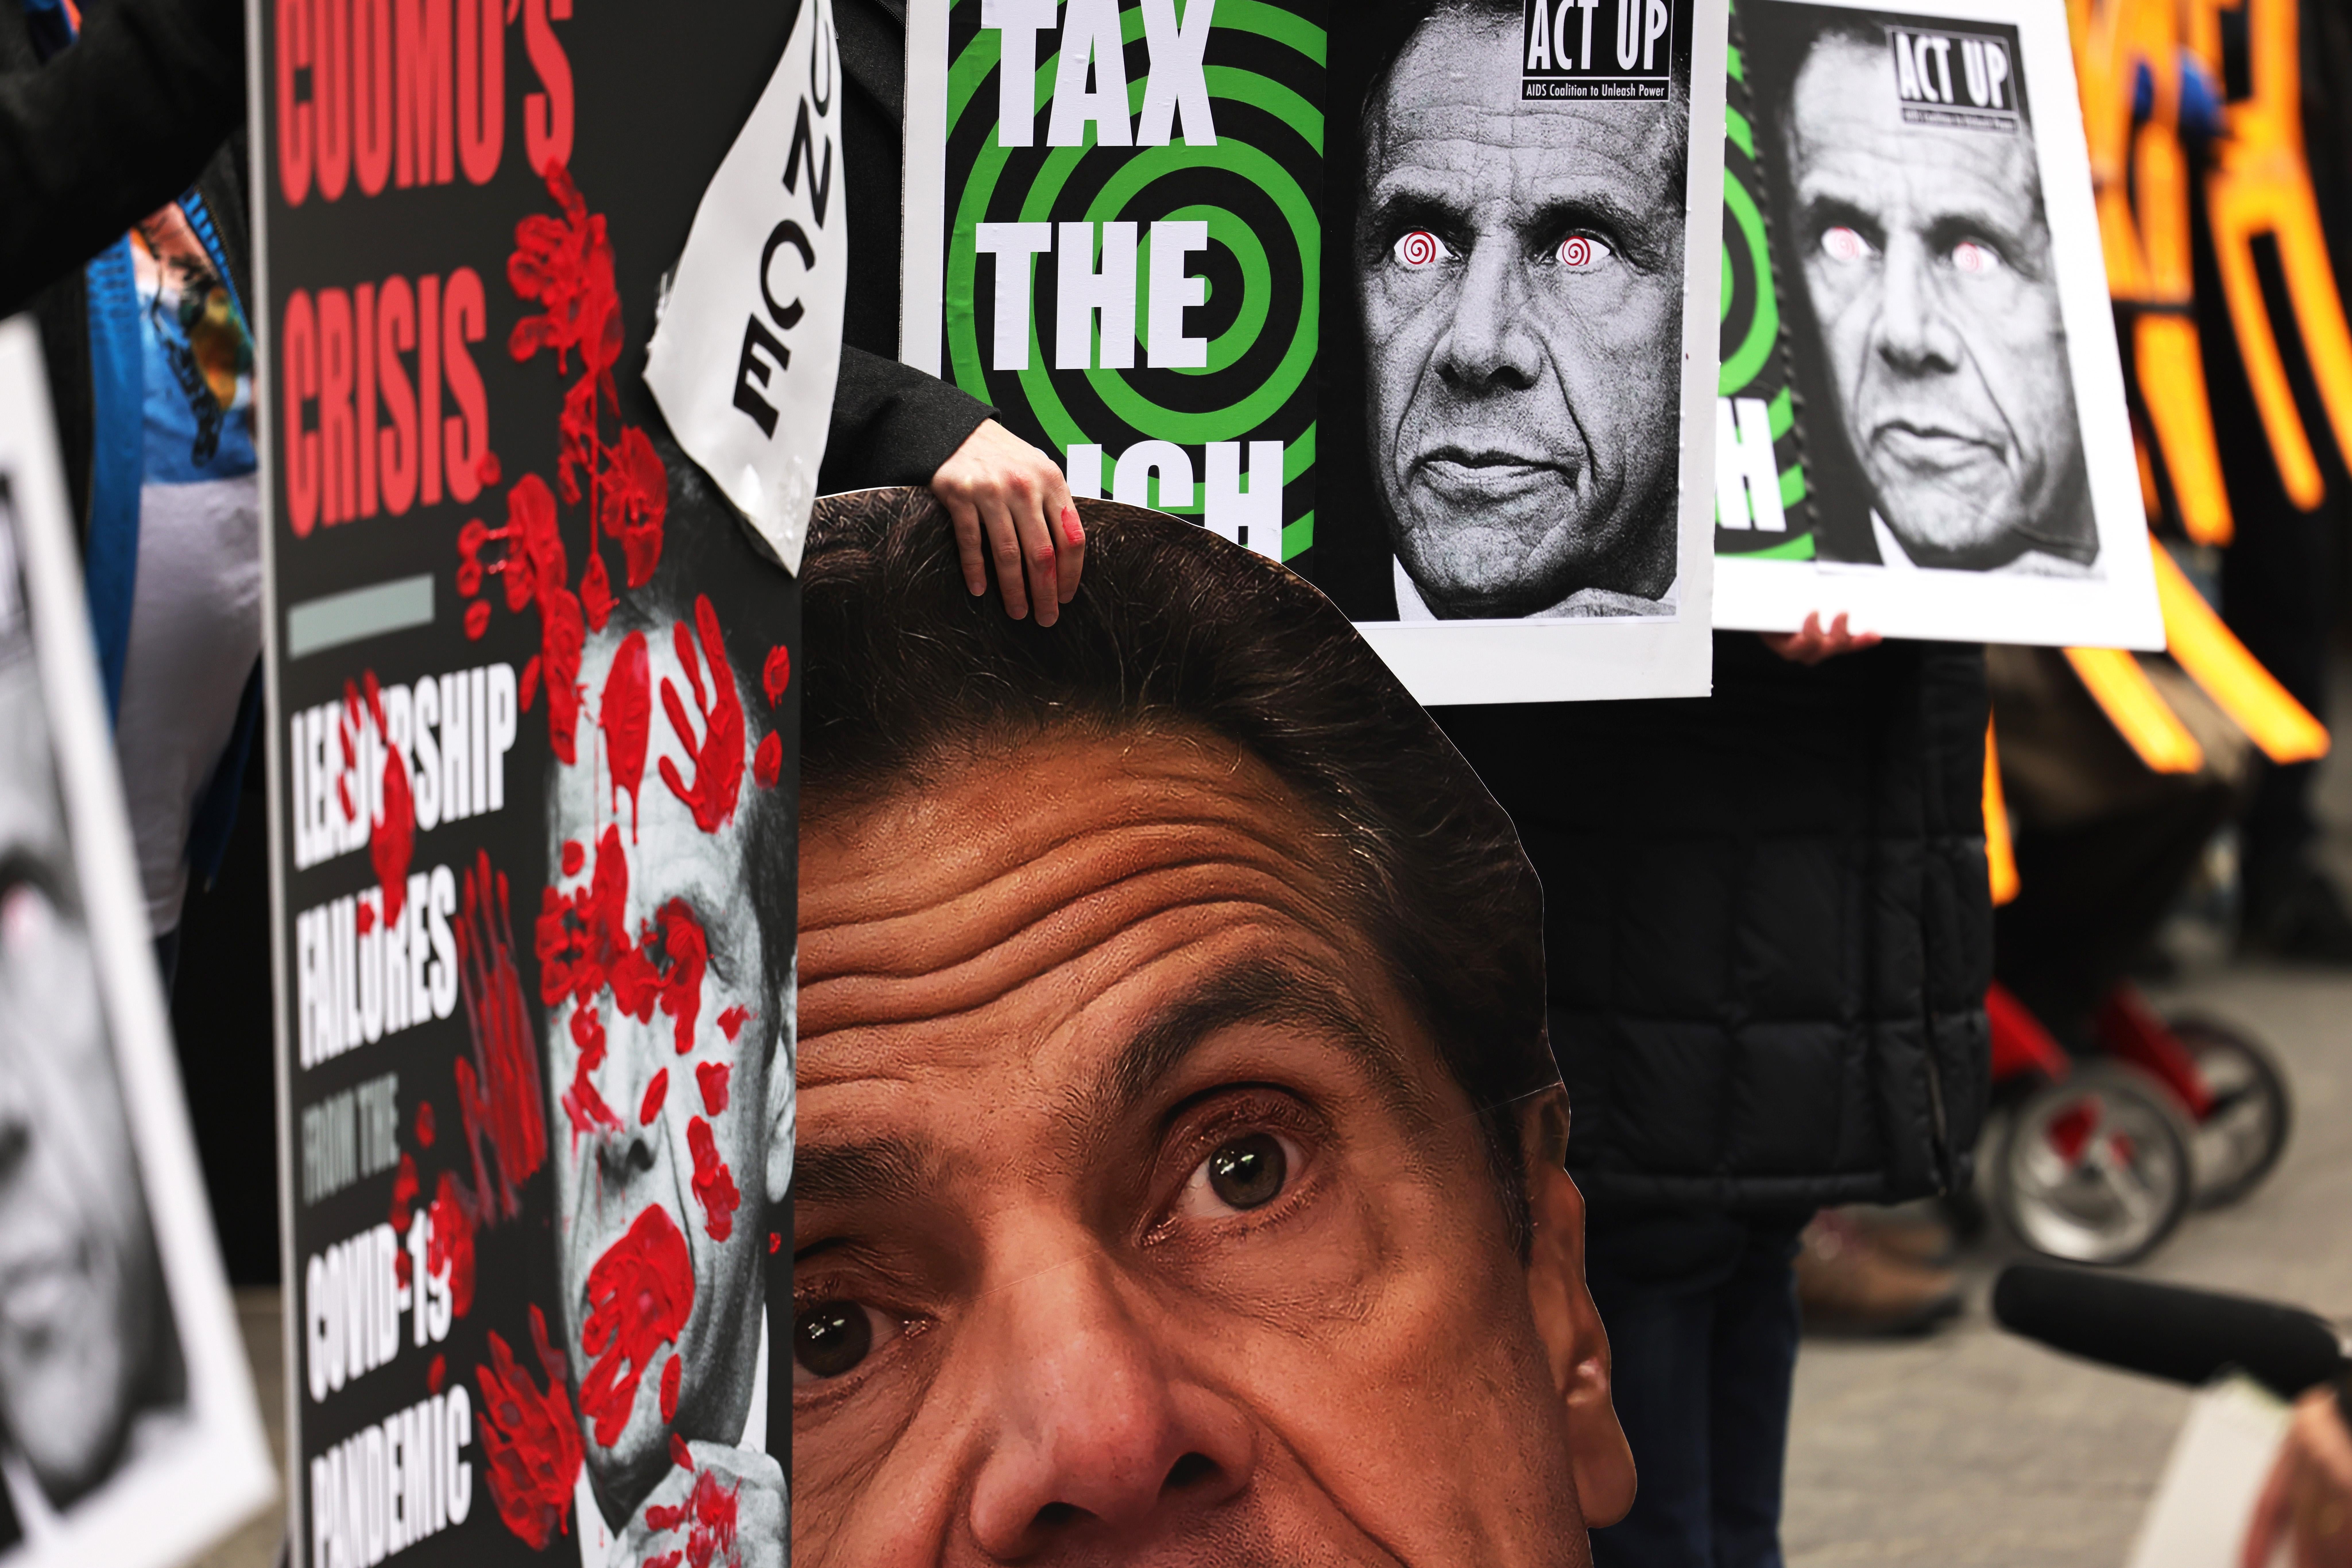 A row of protesters holding signs with Cuomo's picture on them that say "Cuomo's Crisis" and "Tax the Rich"